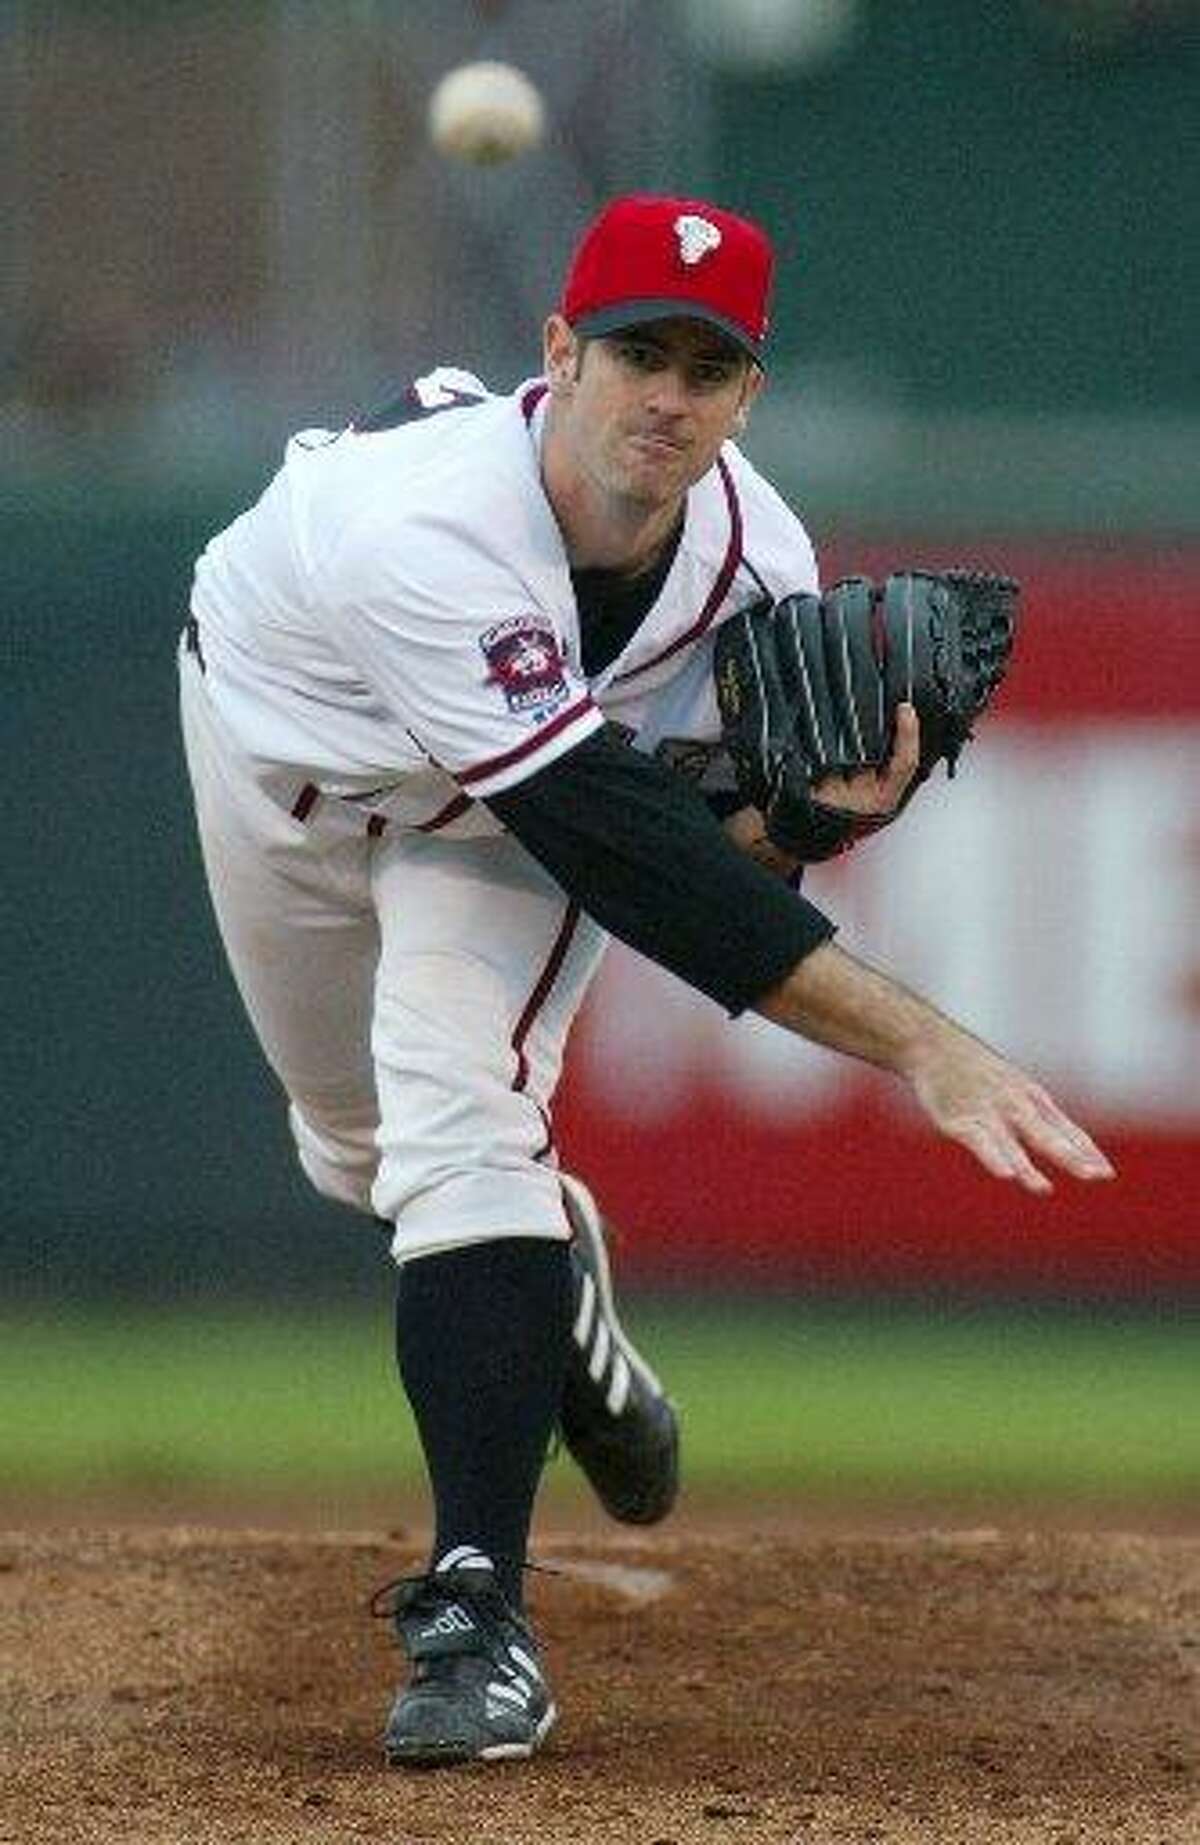 Chicago Cubs’ Mark Prior delivers a pitch for the Lansing Lugnuts against the West Michigan Whitecaps, Tuesday, May 25, 2004, in Lansing, Mich. Prior was on a rehabilitation assignment with the Lugnuts.